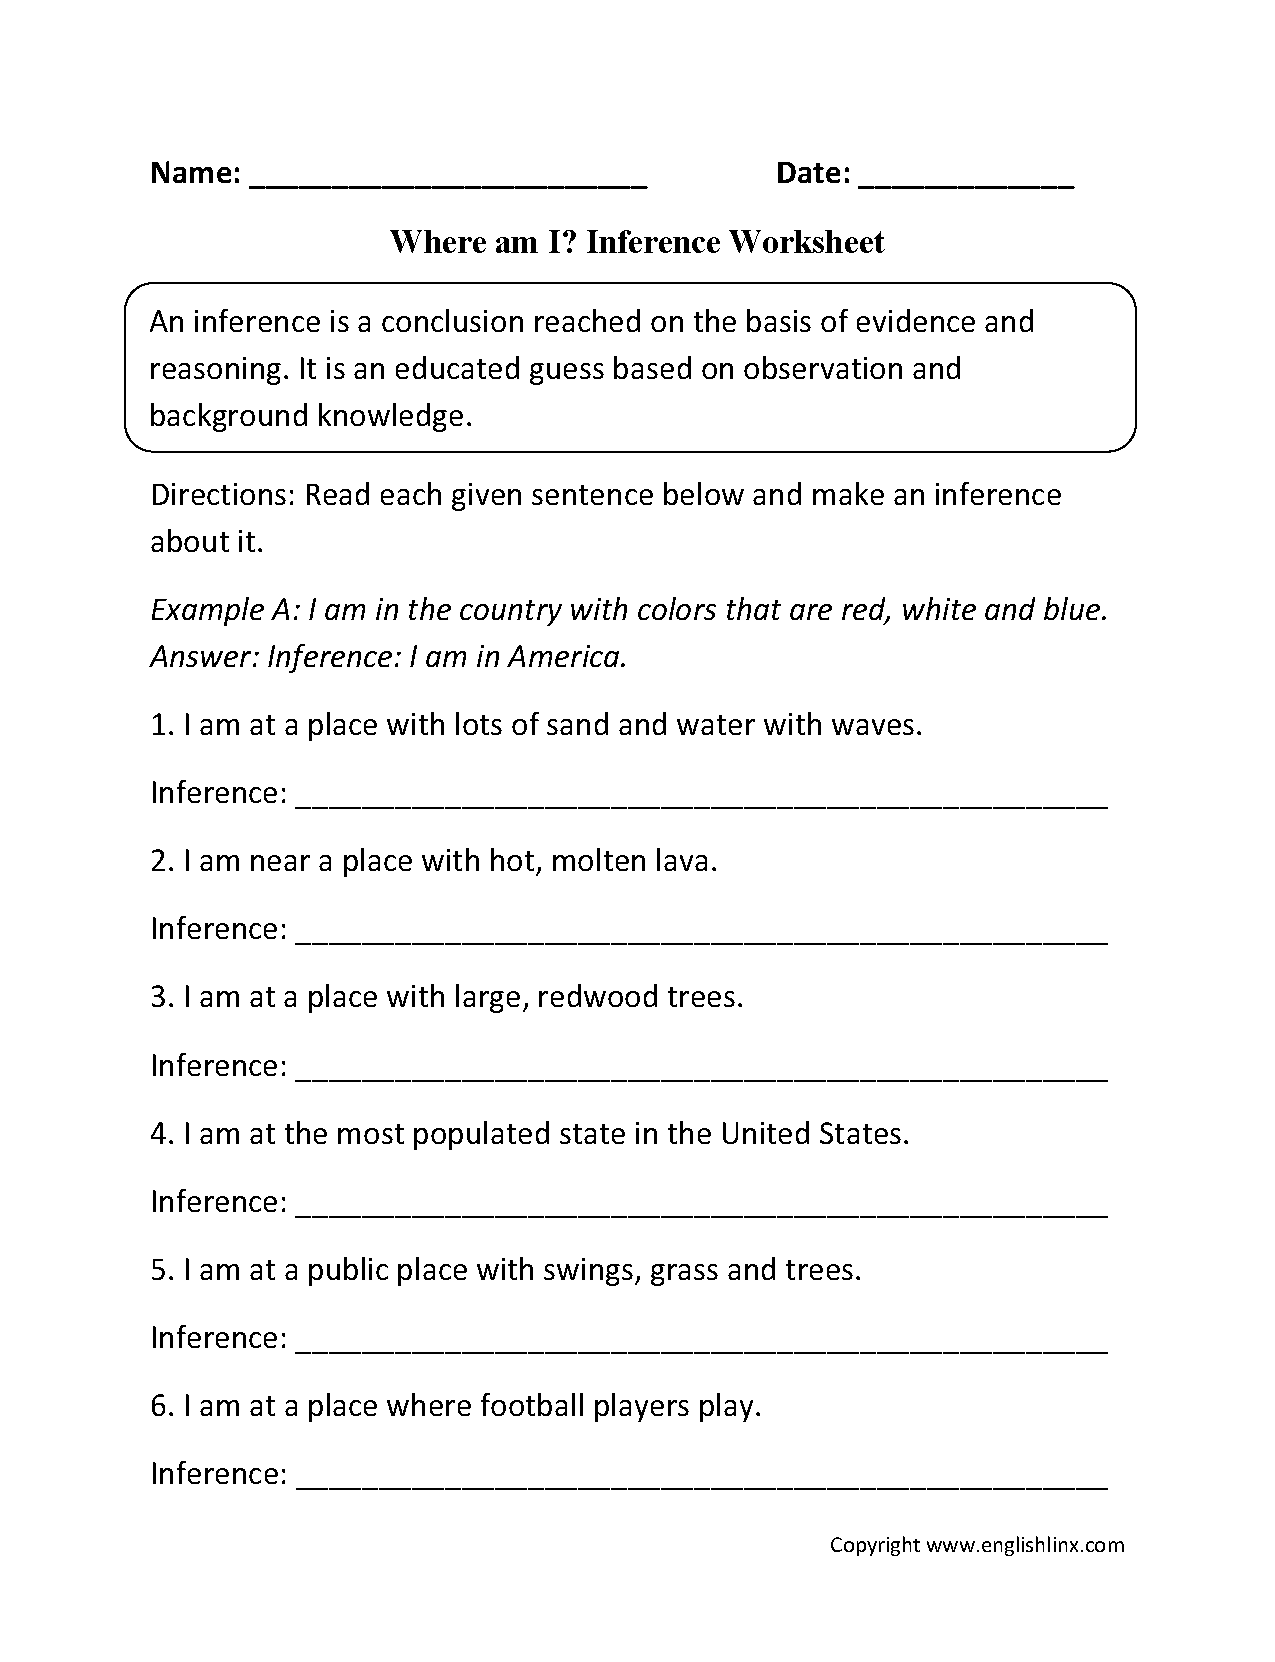 Where am I? Inference Worksheets